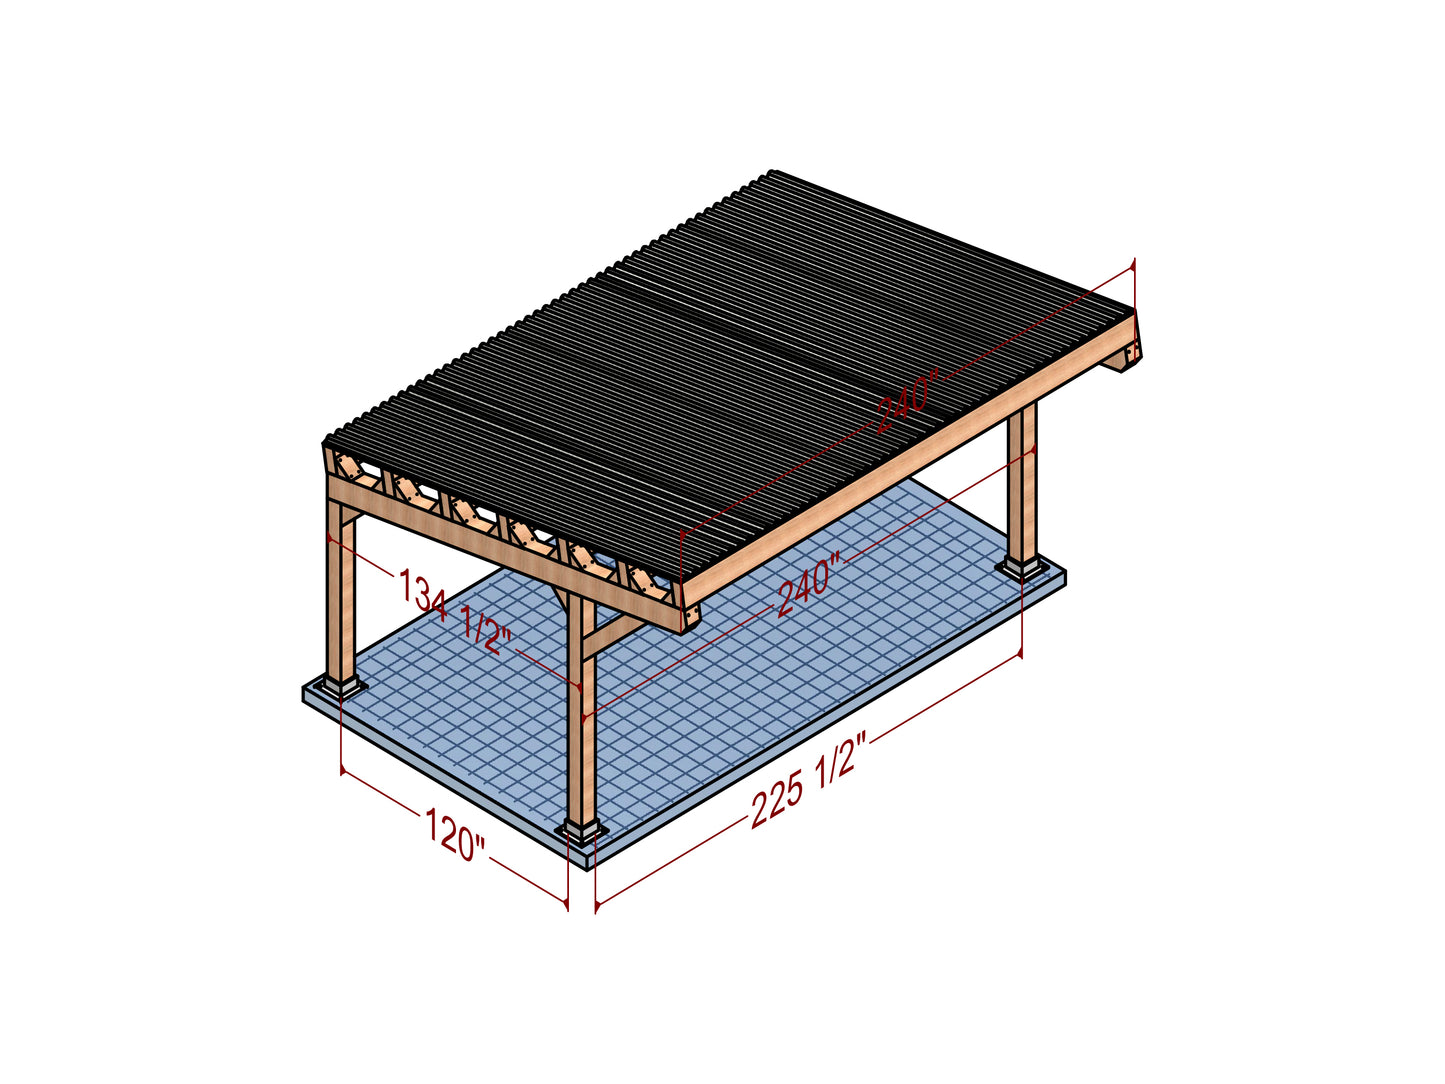 DIY 16x20 ft Wooden Car Garage Plan with Sloping Roof - Drawings, Shopping List, Parts List, Cutting List and Production Animation Included